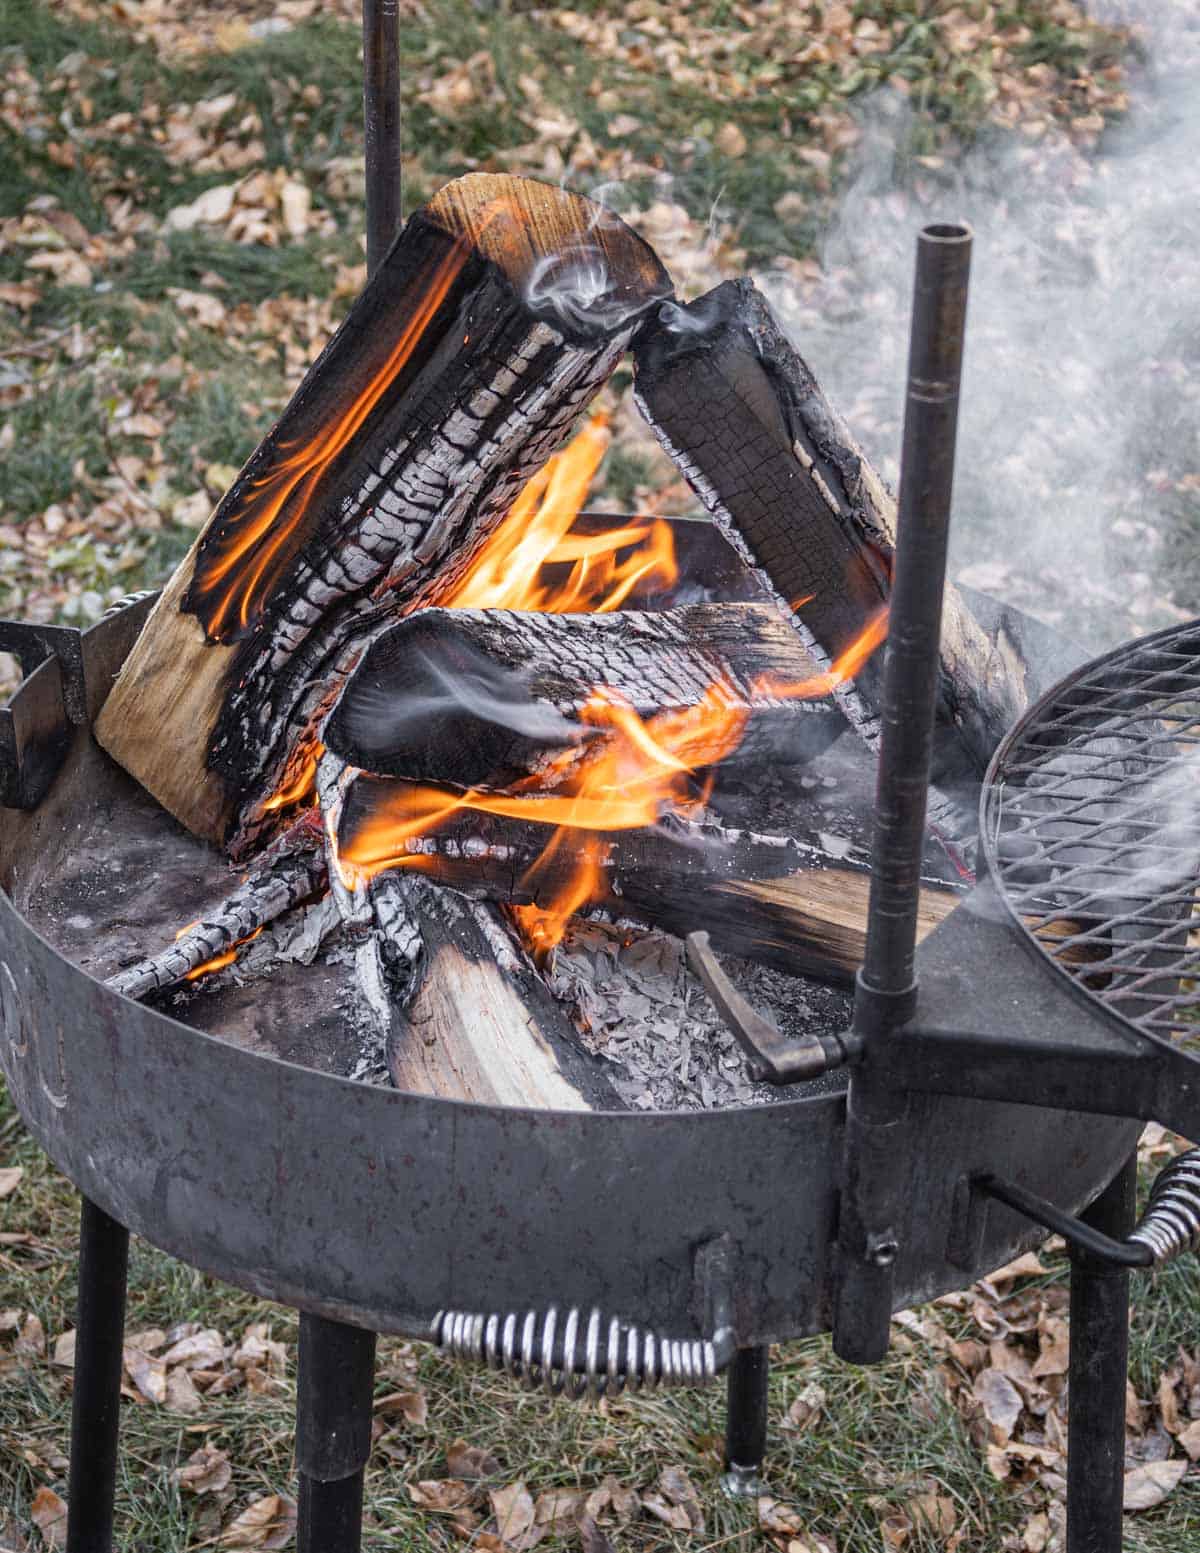 Building a wood fire in a kudu grill. 